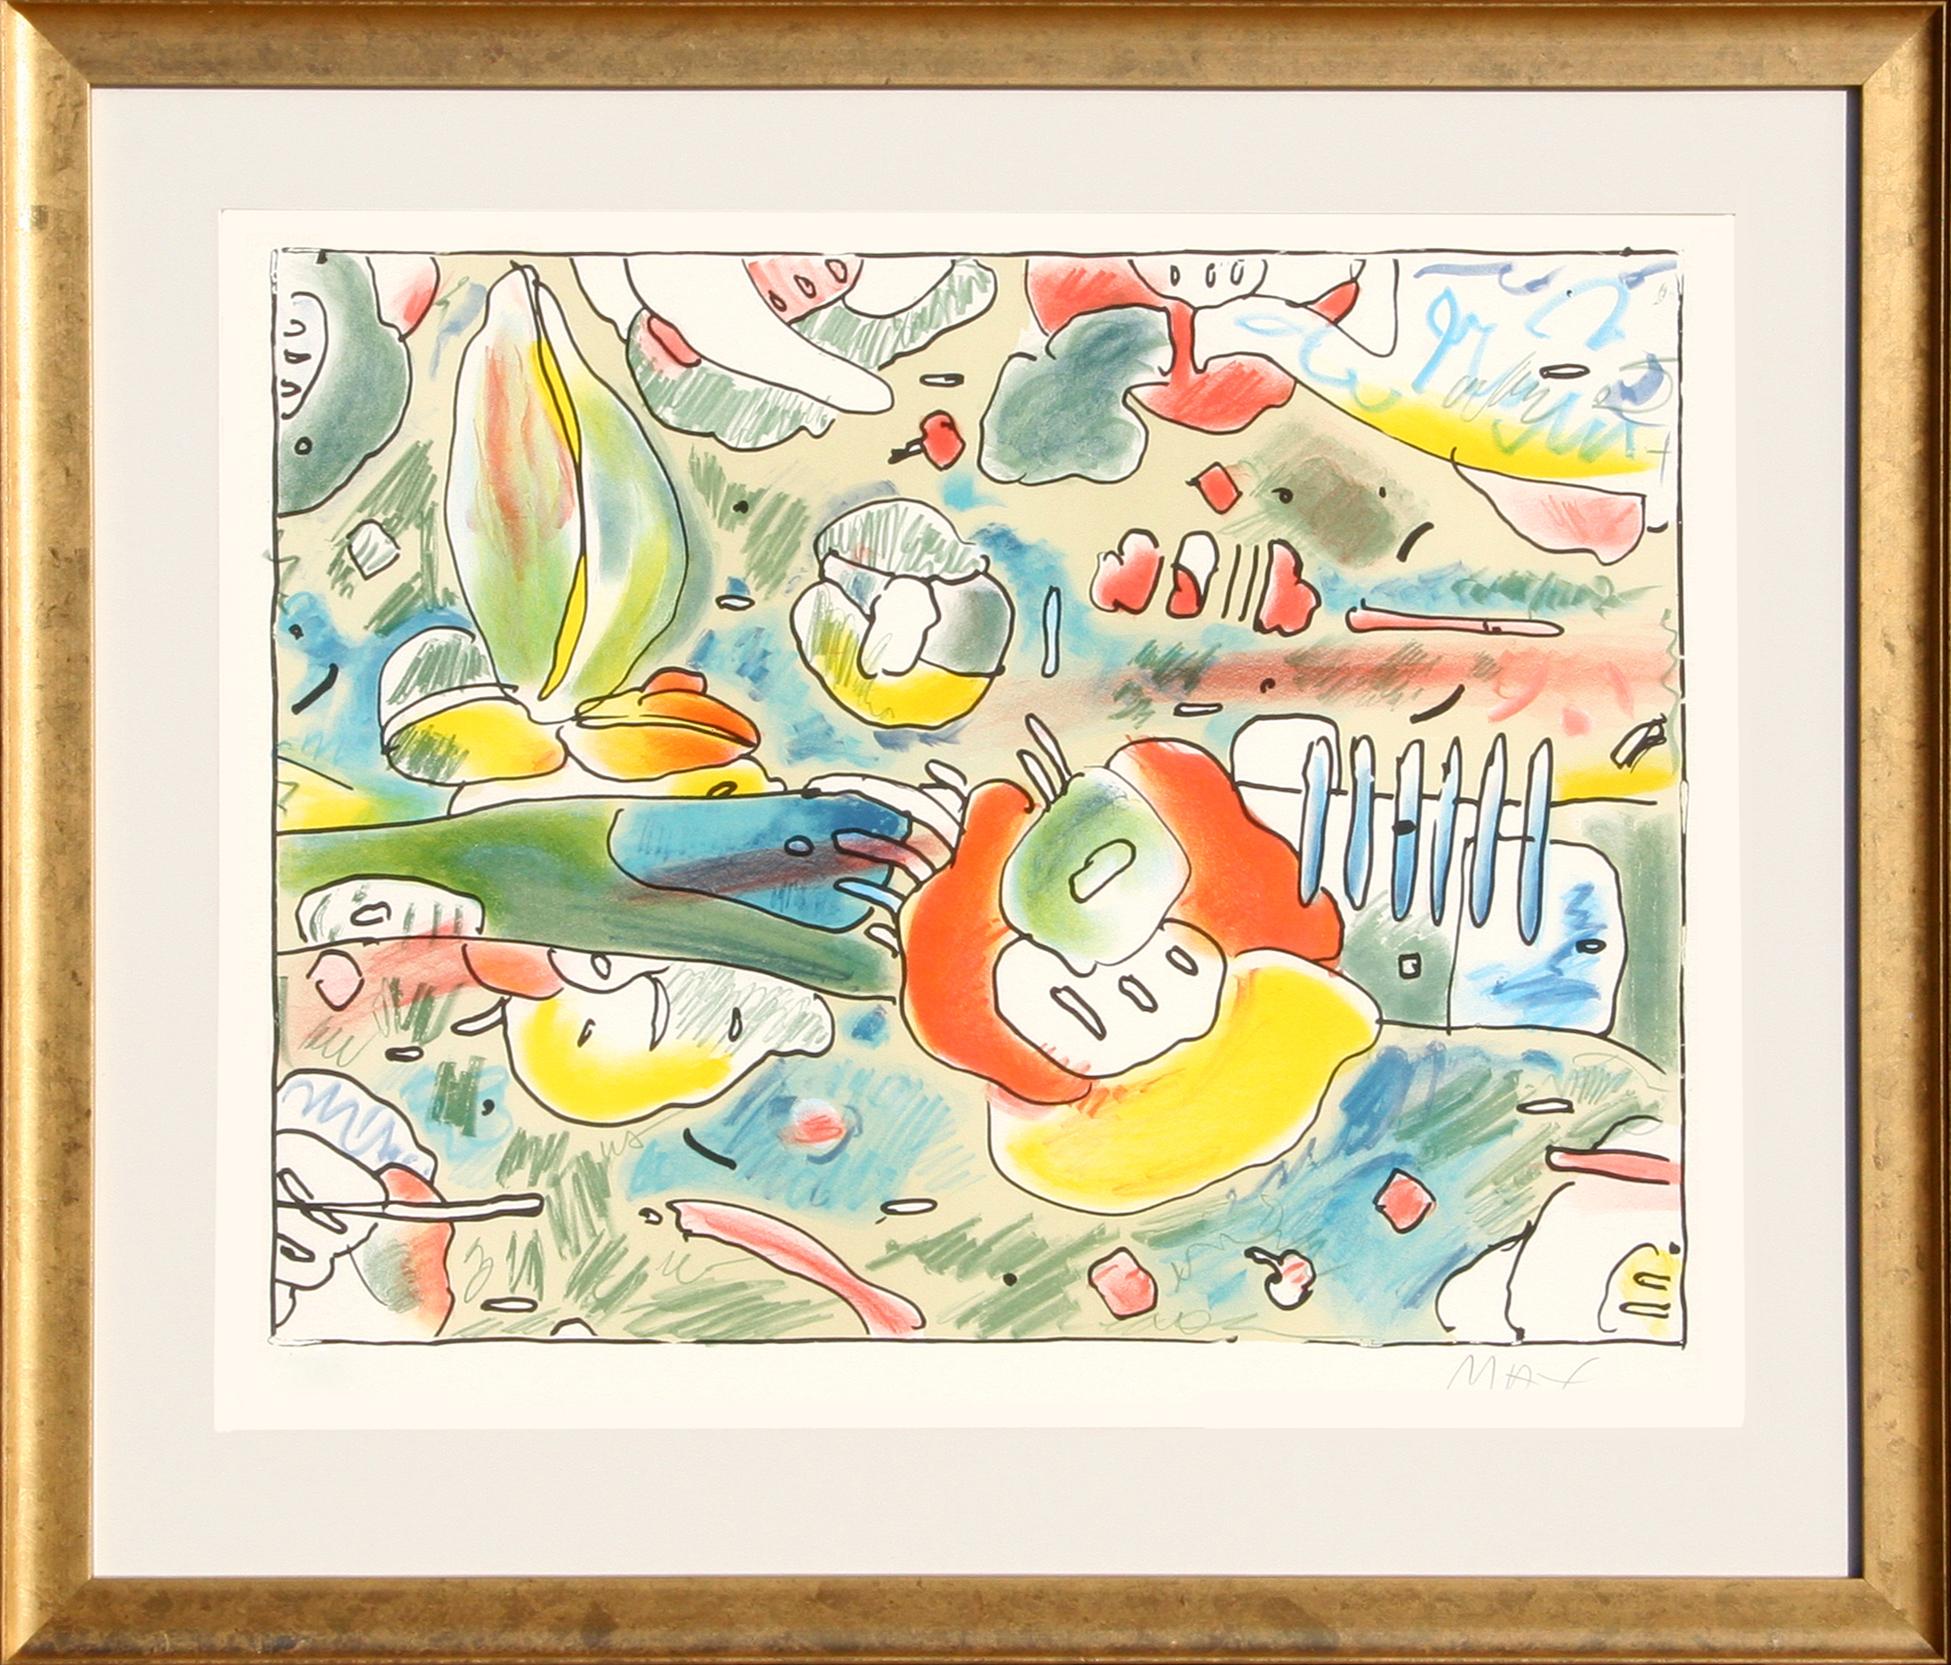 Artist: Peter Max
Title: Flower Abstract
Year: 1980
Medium: Lithograph, signed and numbered in pencil 
Edition: 165, HC
Paper Size: 22 in. x 27 in. (55.88 cm x 68.58 cm)
Frame Size: 28.5 x 32.5